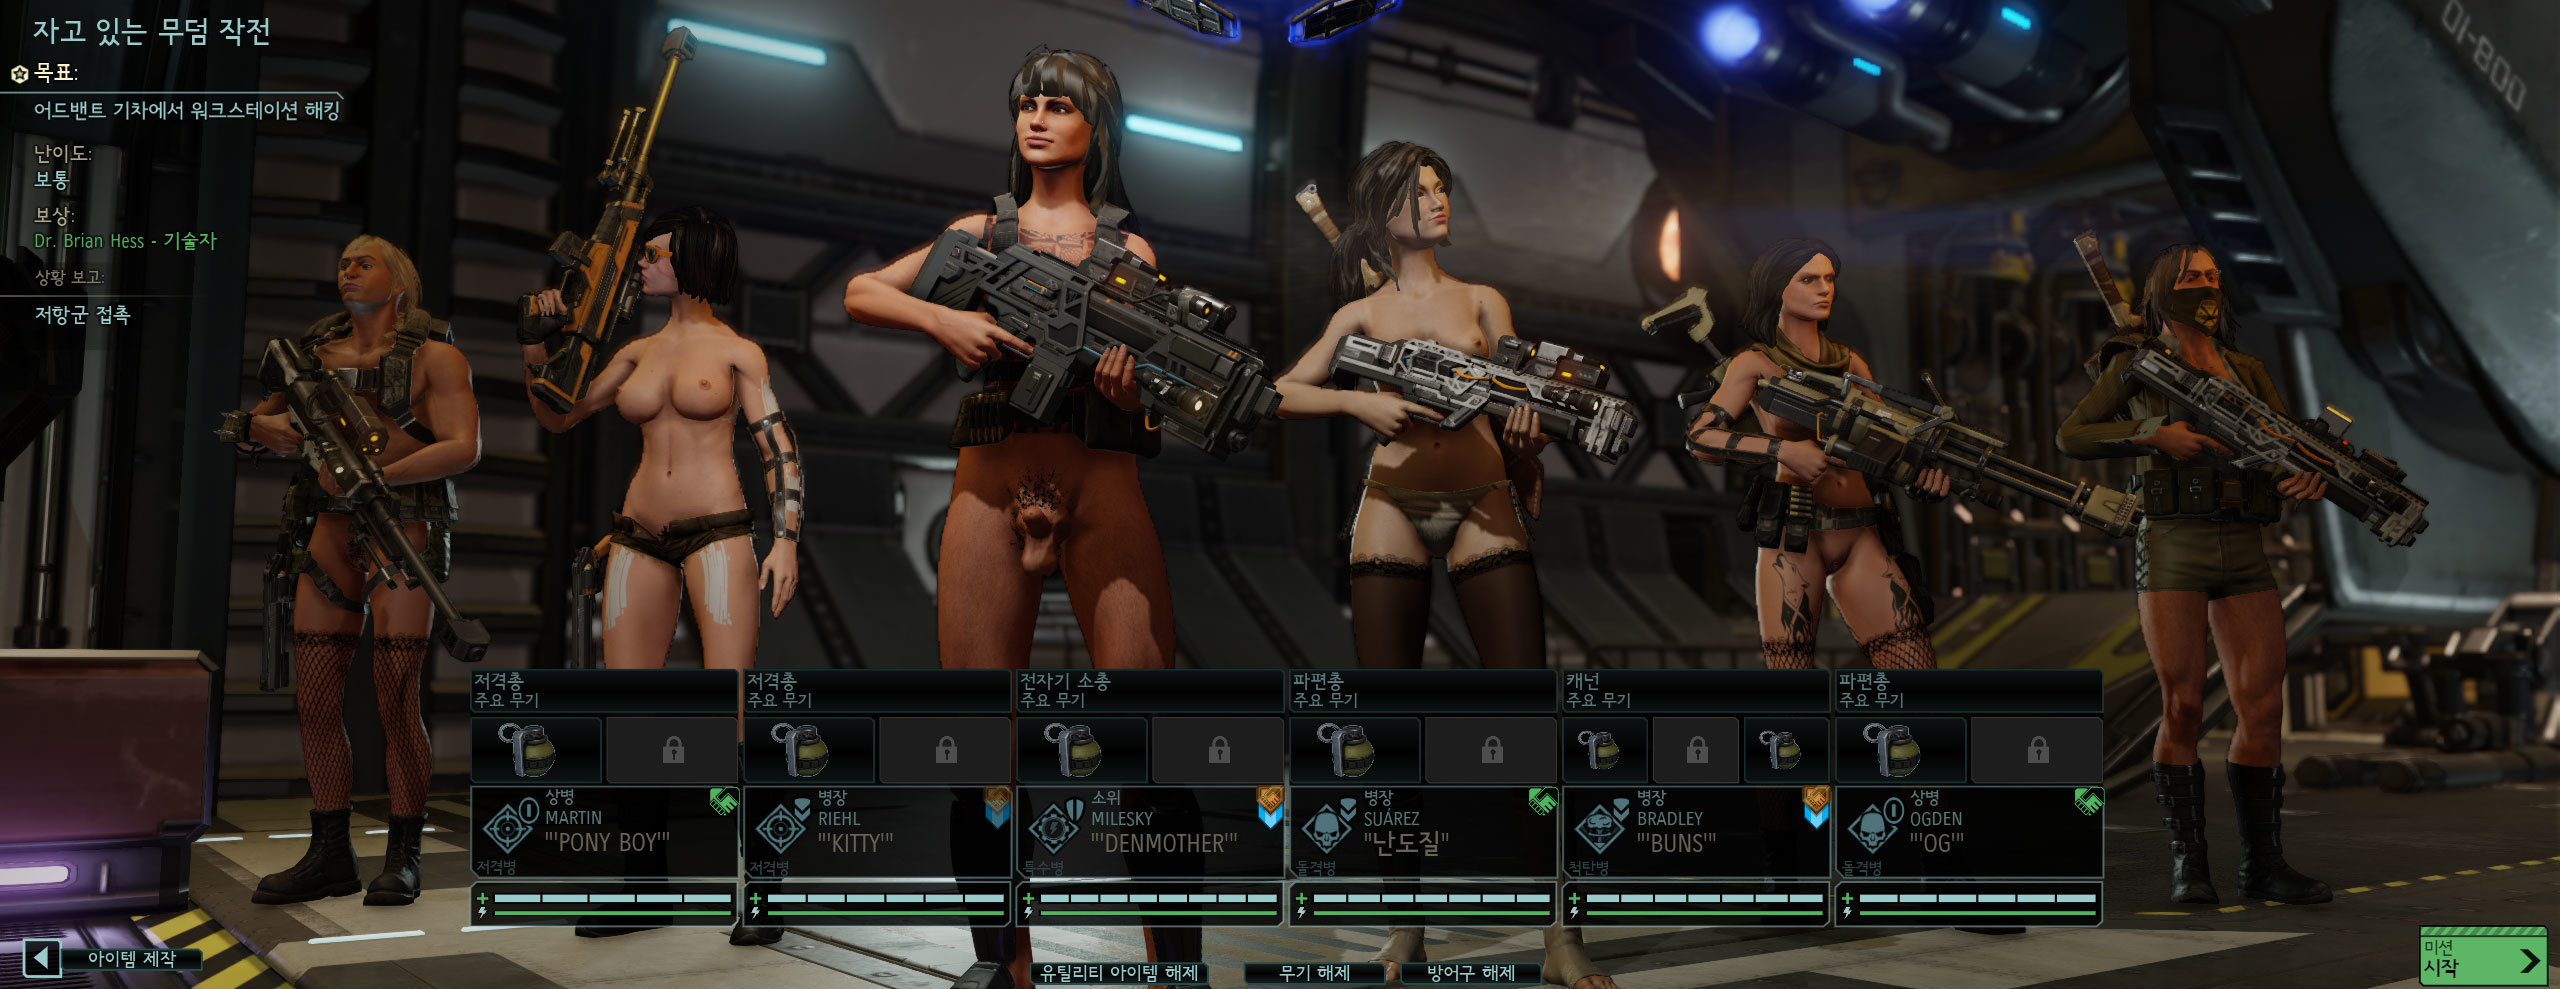 Lewd Mods And Xcom 2 Page 65 Adult Gaming Loverslab Free Download Nude Phot...